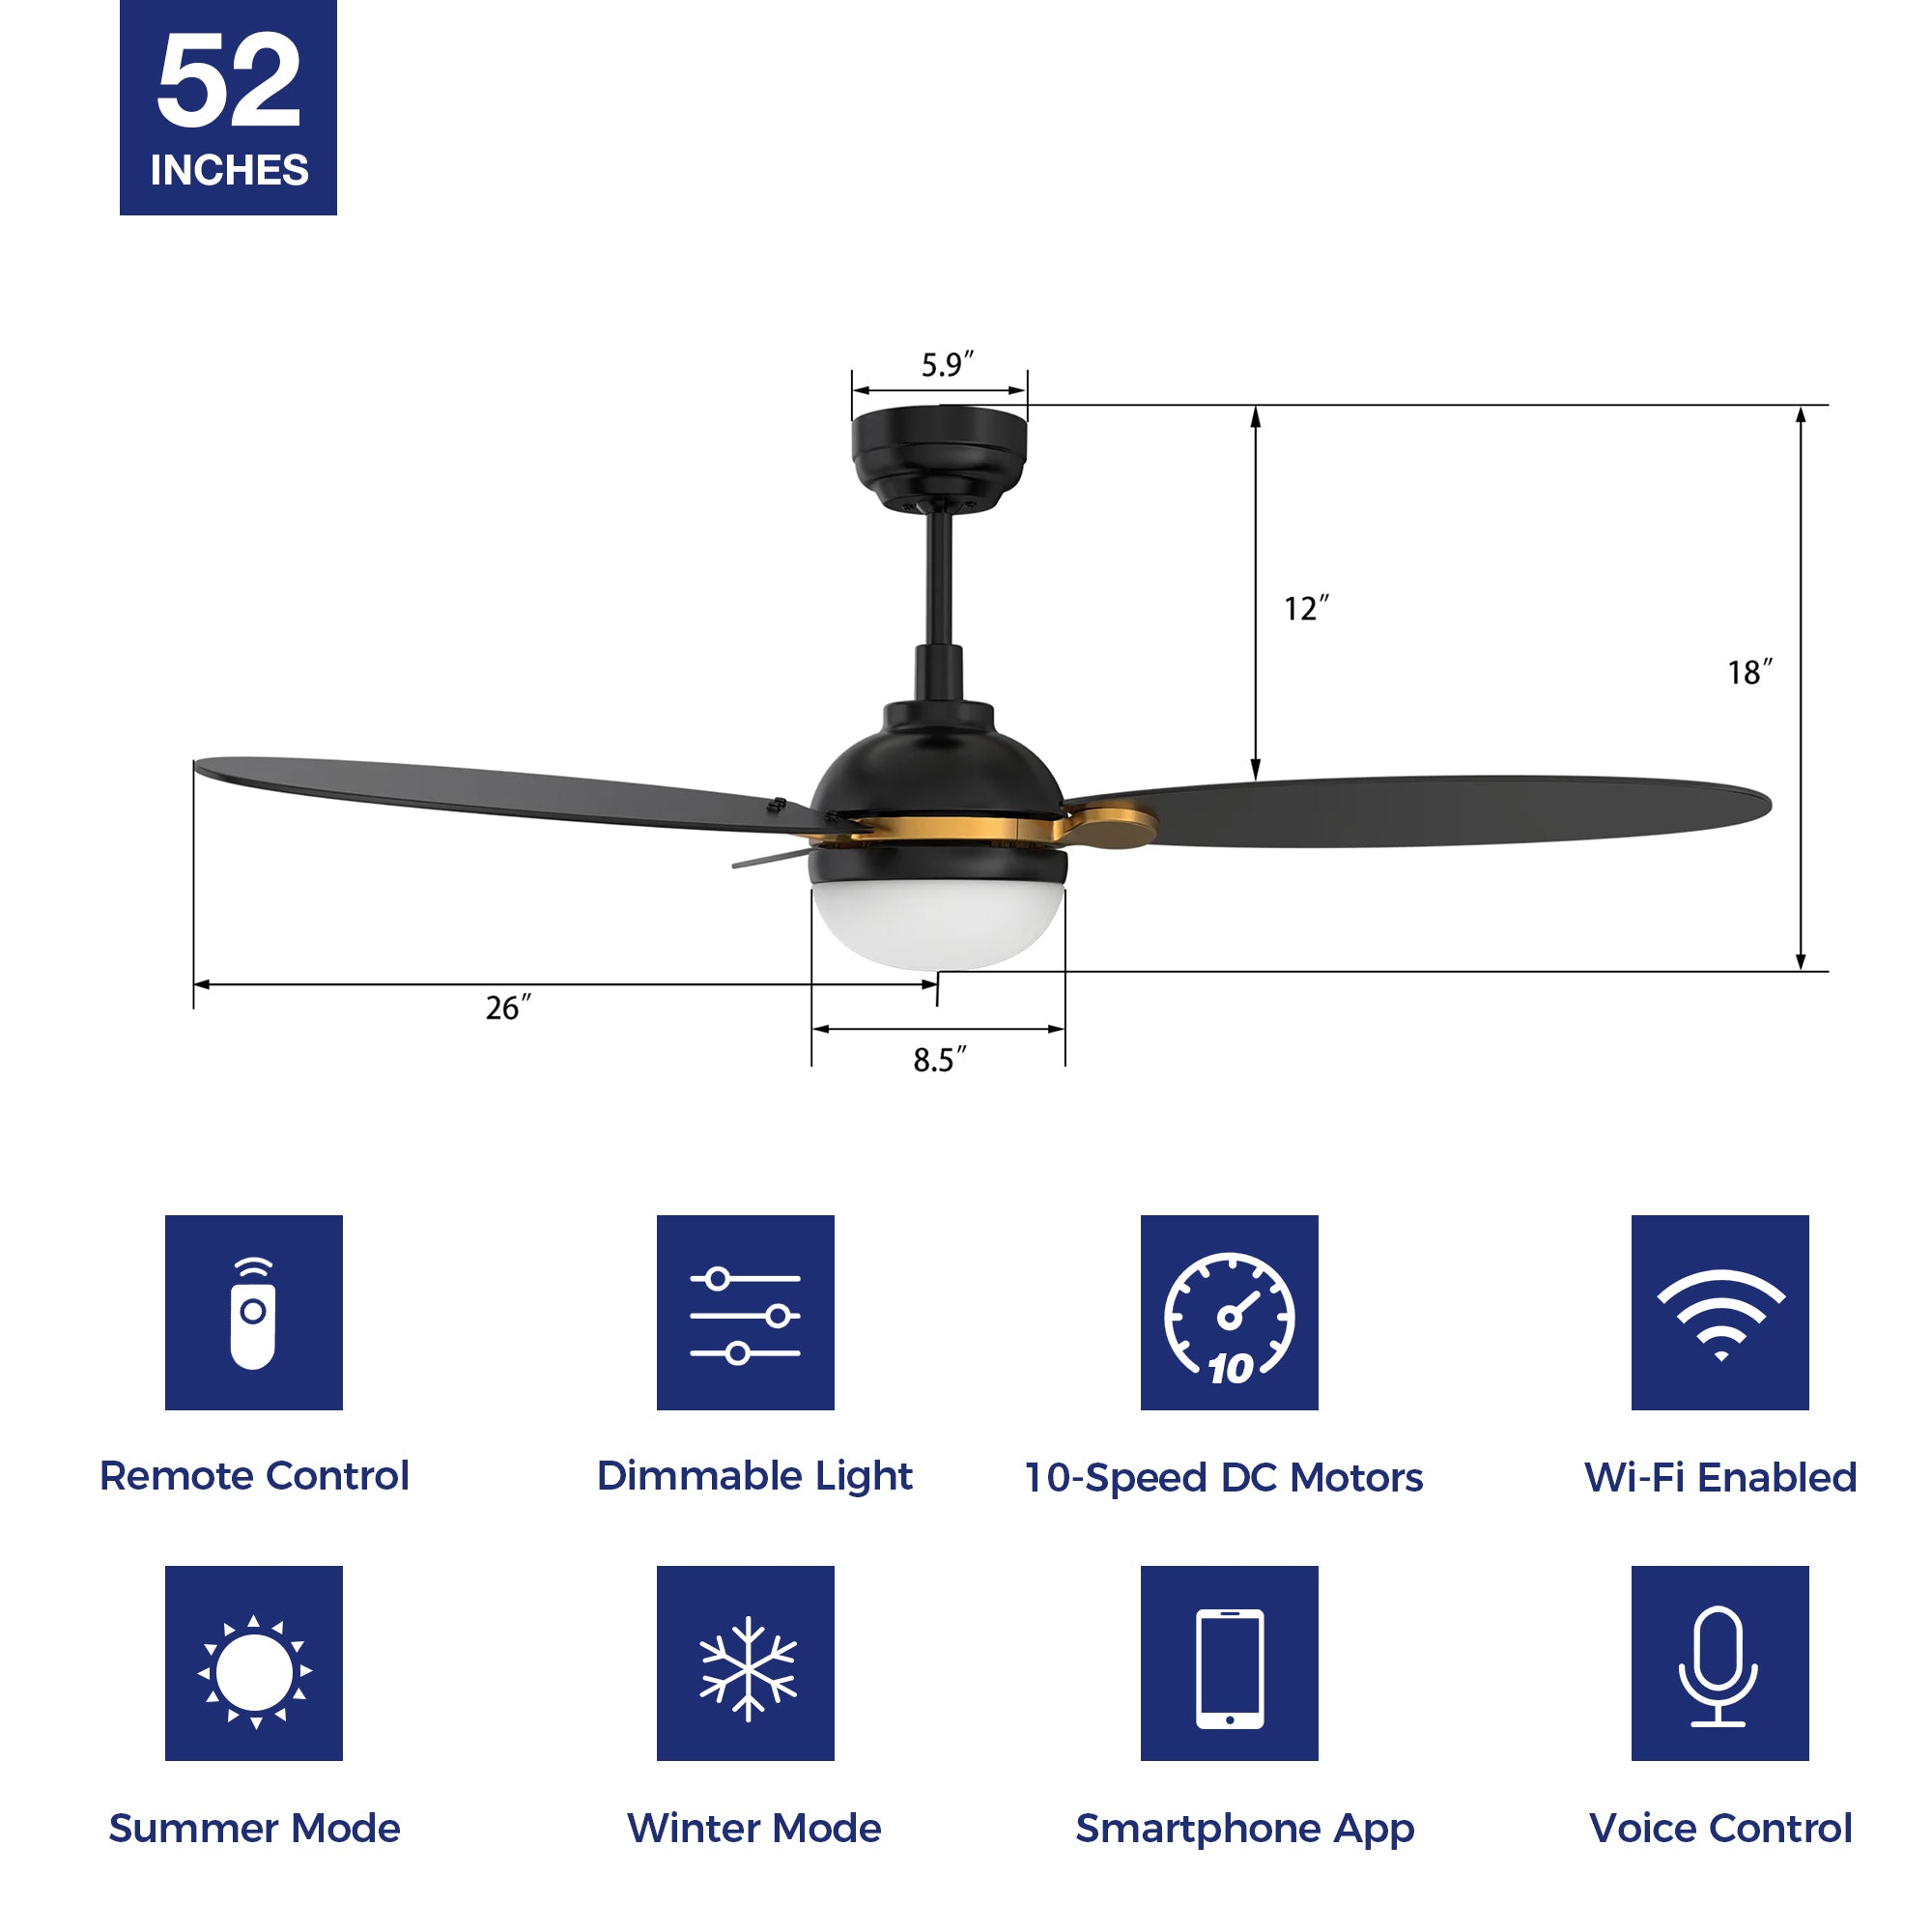 This Raddix 52&#39;&#39; smart ceiling fan keeps your space cool, bright, and stylish. It is a soft modern masterpiece perfect for your large indoor living spaces. This Wifi smart ceiling fan is a simplicity designing with Black finish, use elegant Plywood blades and has an integrated 4000K LED cool light. The fan features Remote control, Wi-Fi apps, Siri Shortcut and Voice control technology (compatible with Amazon Alexa and Google Home Assistant ) to set fan preferences.